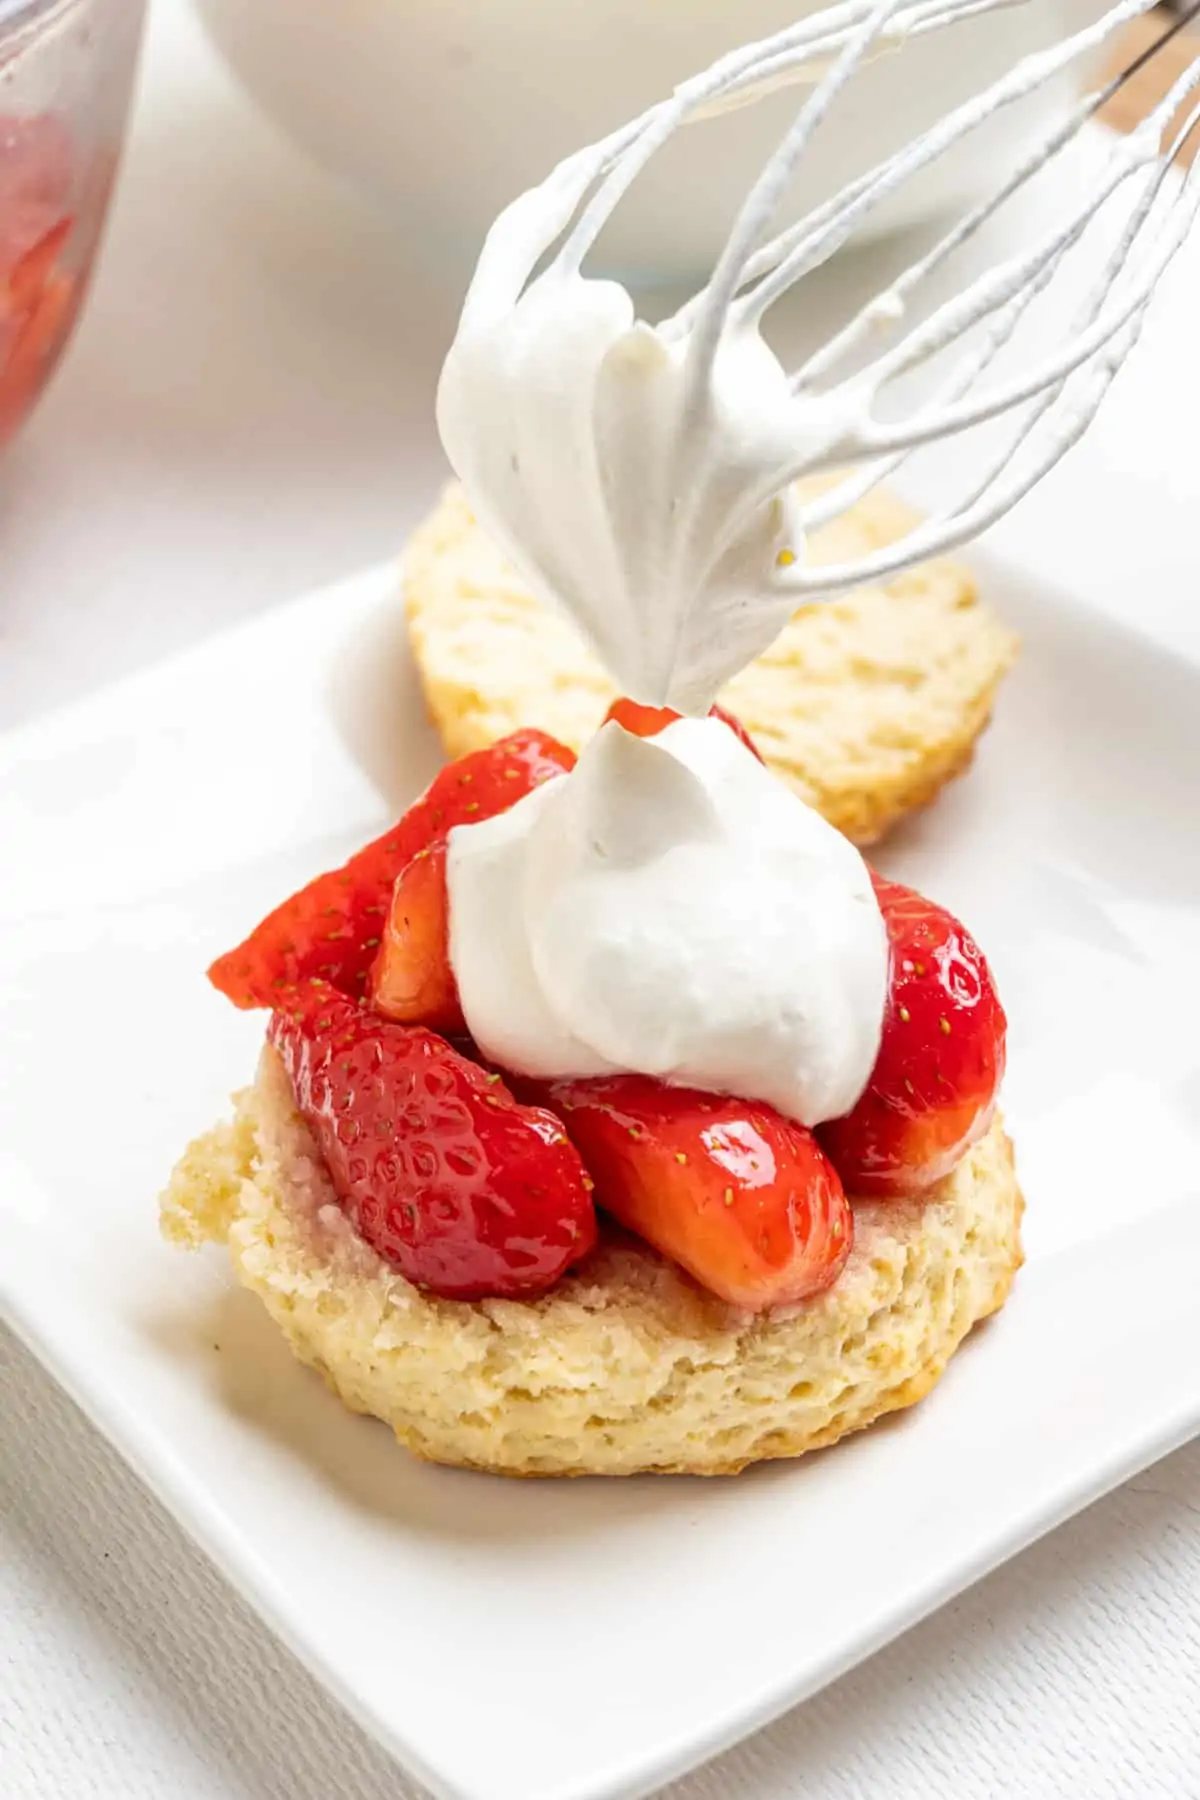 A whisk is dropping a dollop of whipped cream onto a bisuit topped with juicy red strawberries.